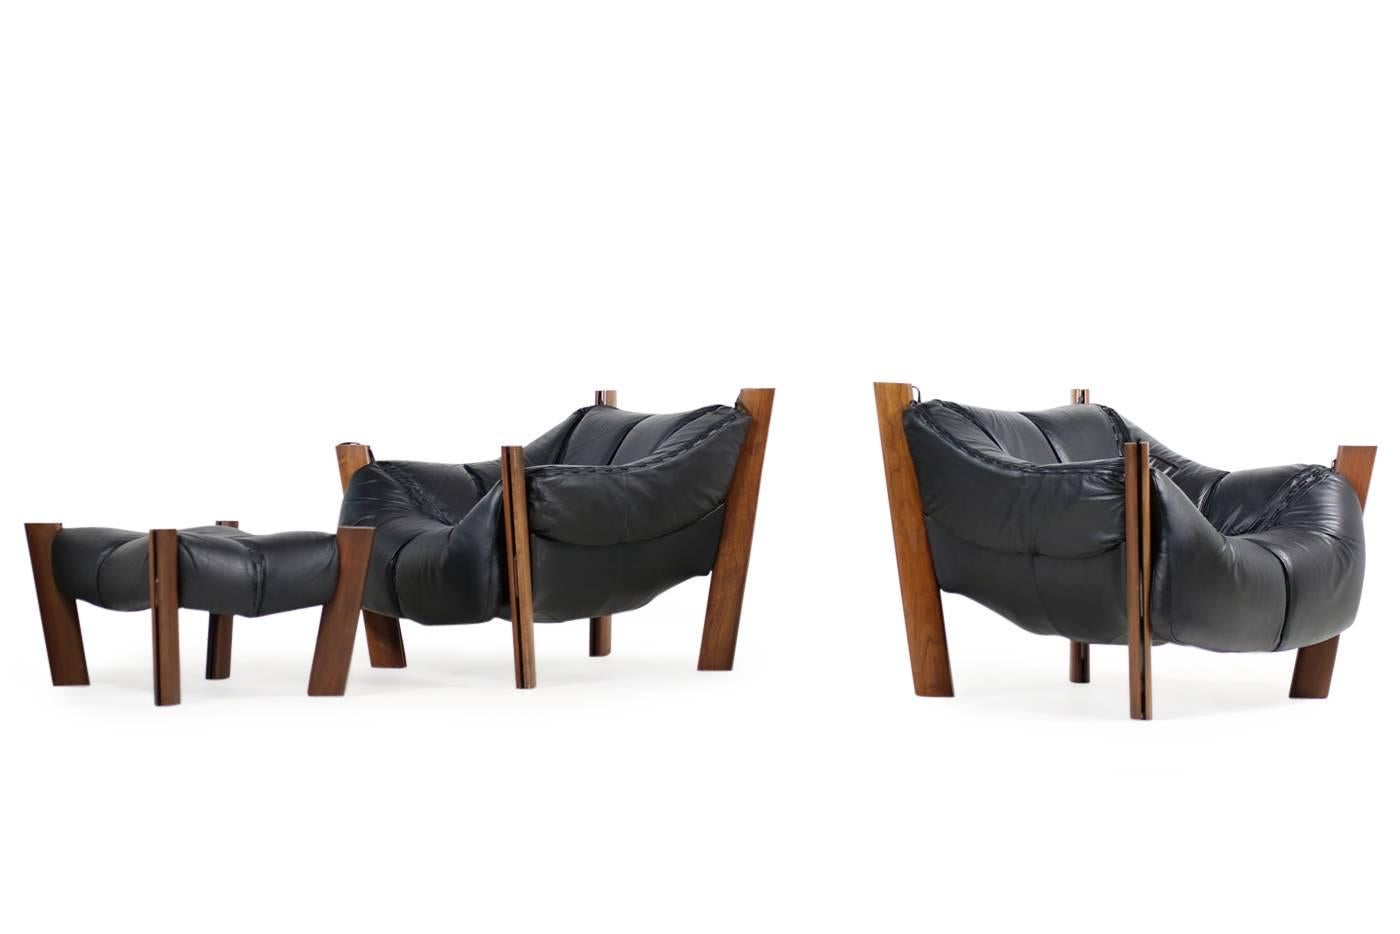 Beautiful vintage lounge chairs with ottoman by Percival Lafer, designed in 1974 in Brazil, solid wooden jacaranda base and leather. 
We also offer the matching lounge sofa.

Measures: sofa 220 x 93 x 74cm sh 38cm
chairs 95 x 93 x 74cm sh